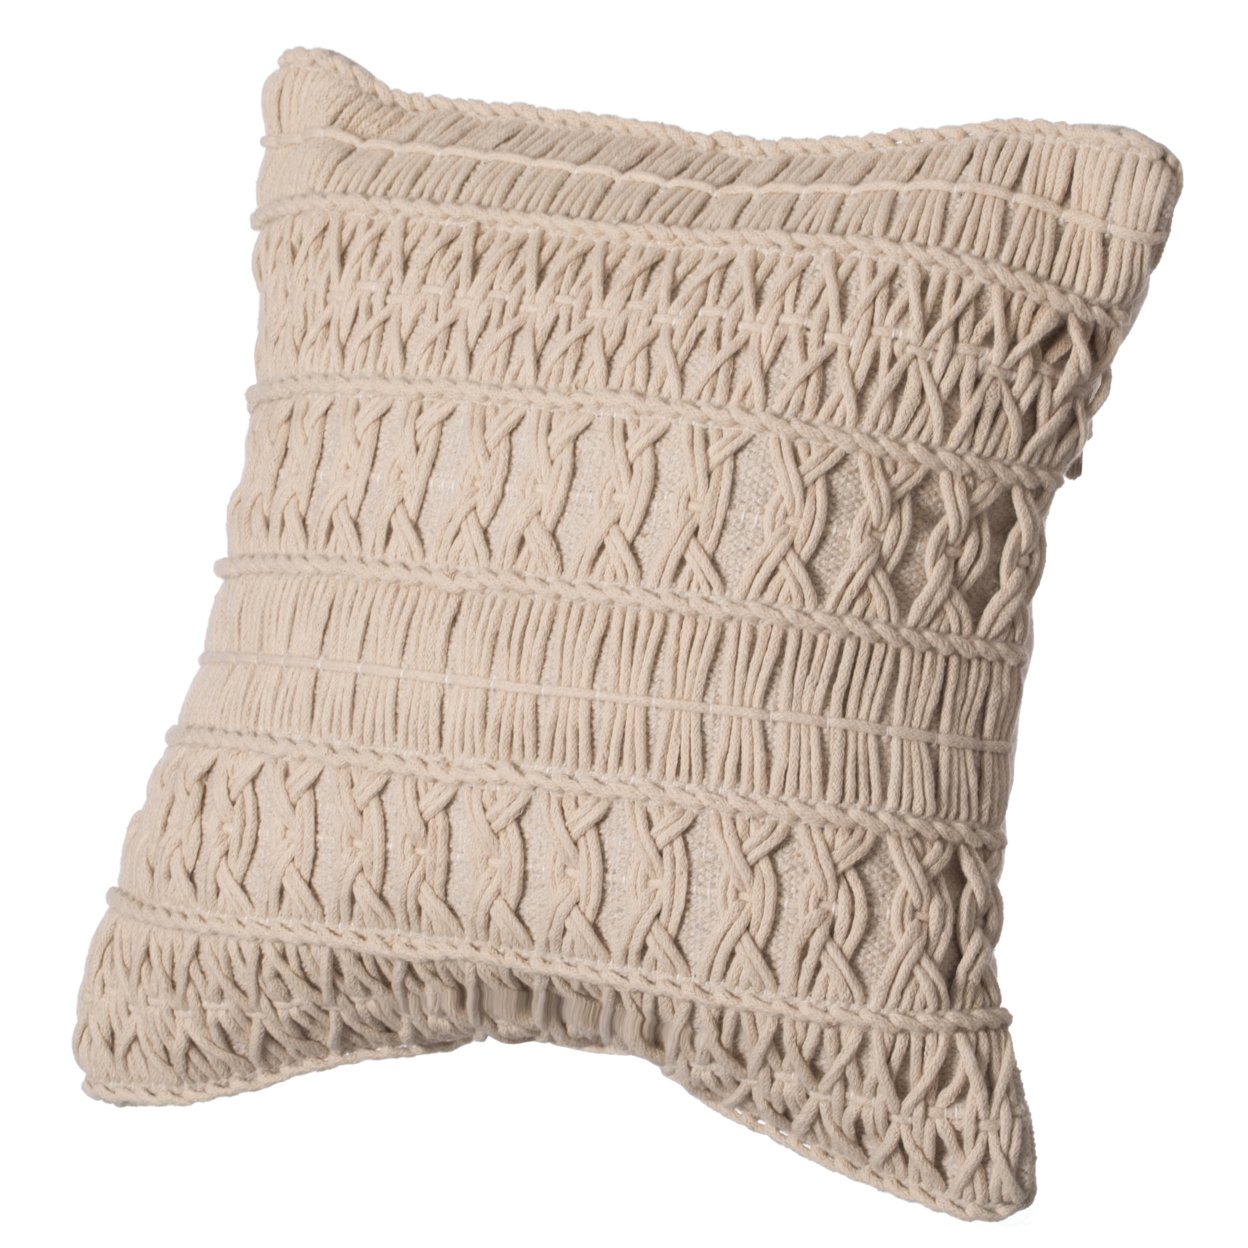 16 Handwoven Cotton Throw Pillow Cover With Layered Random String Pattern - Pillowcase Only